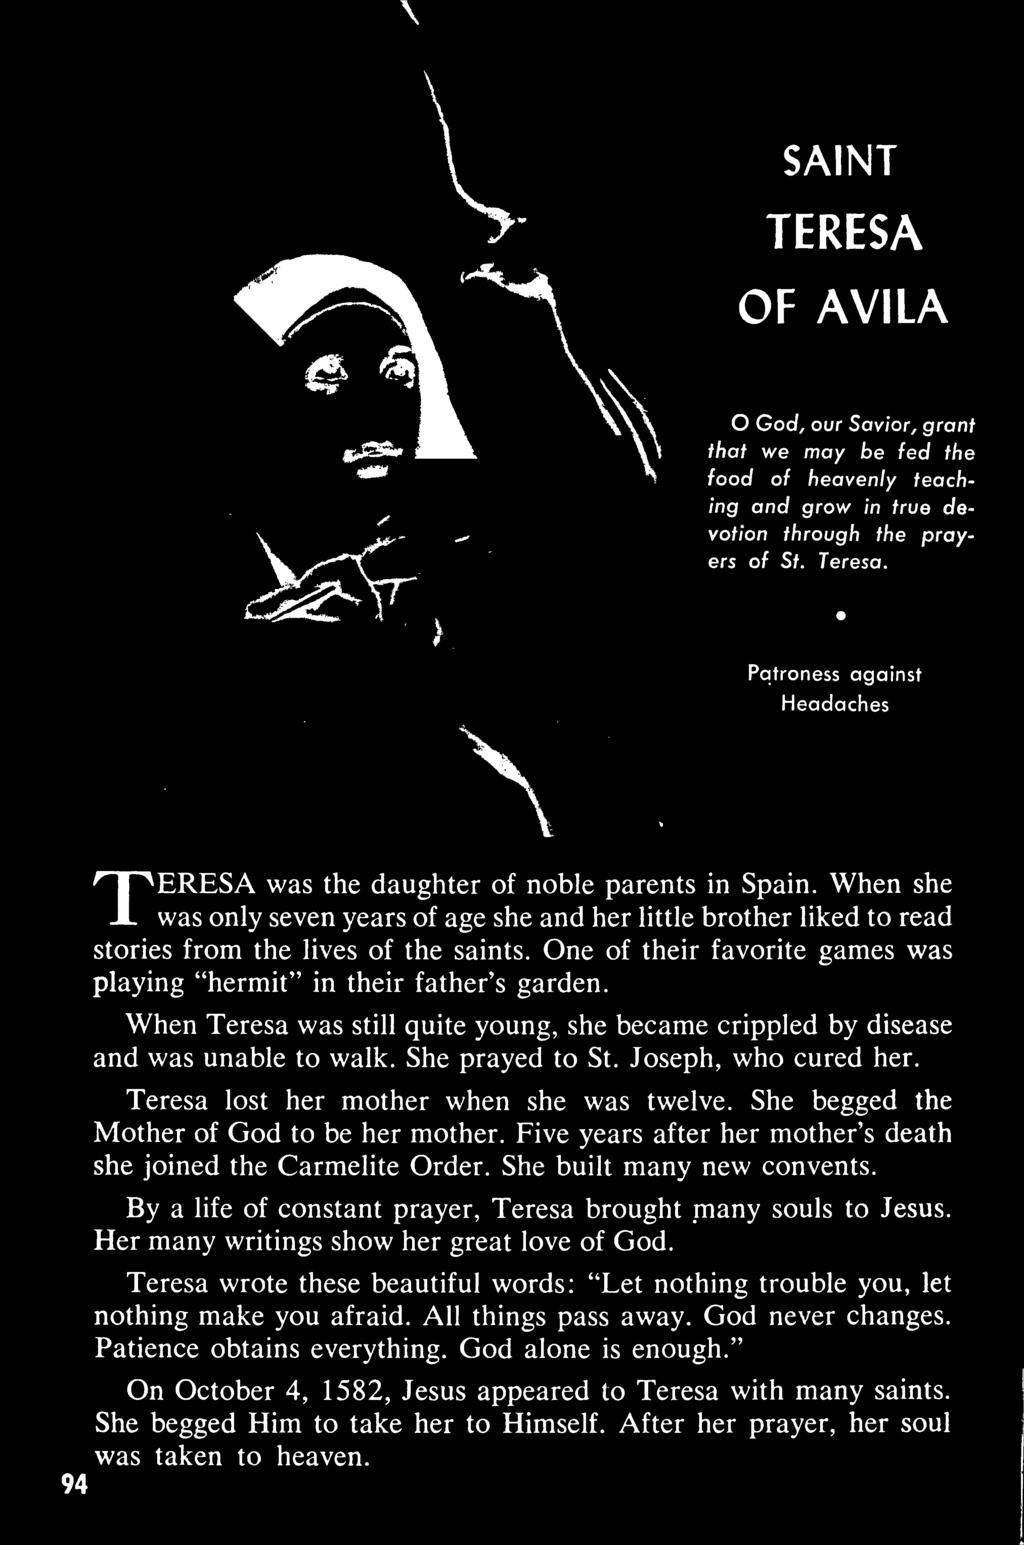 TERESA OF AVILA O Goc/, our Savior, grant that we may be fed the food of heavenly teaching and grow in true devotion through the prayers of St. Teresa.